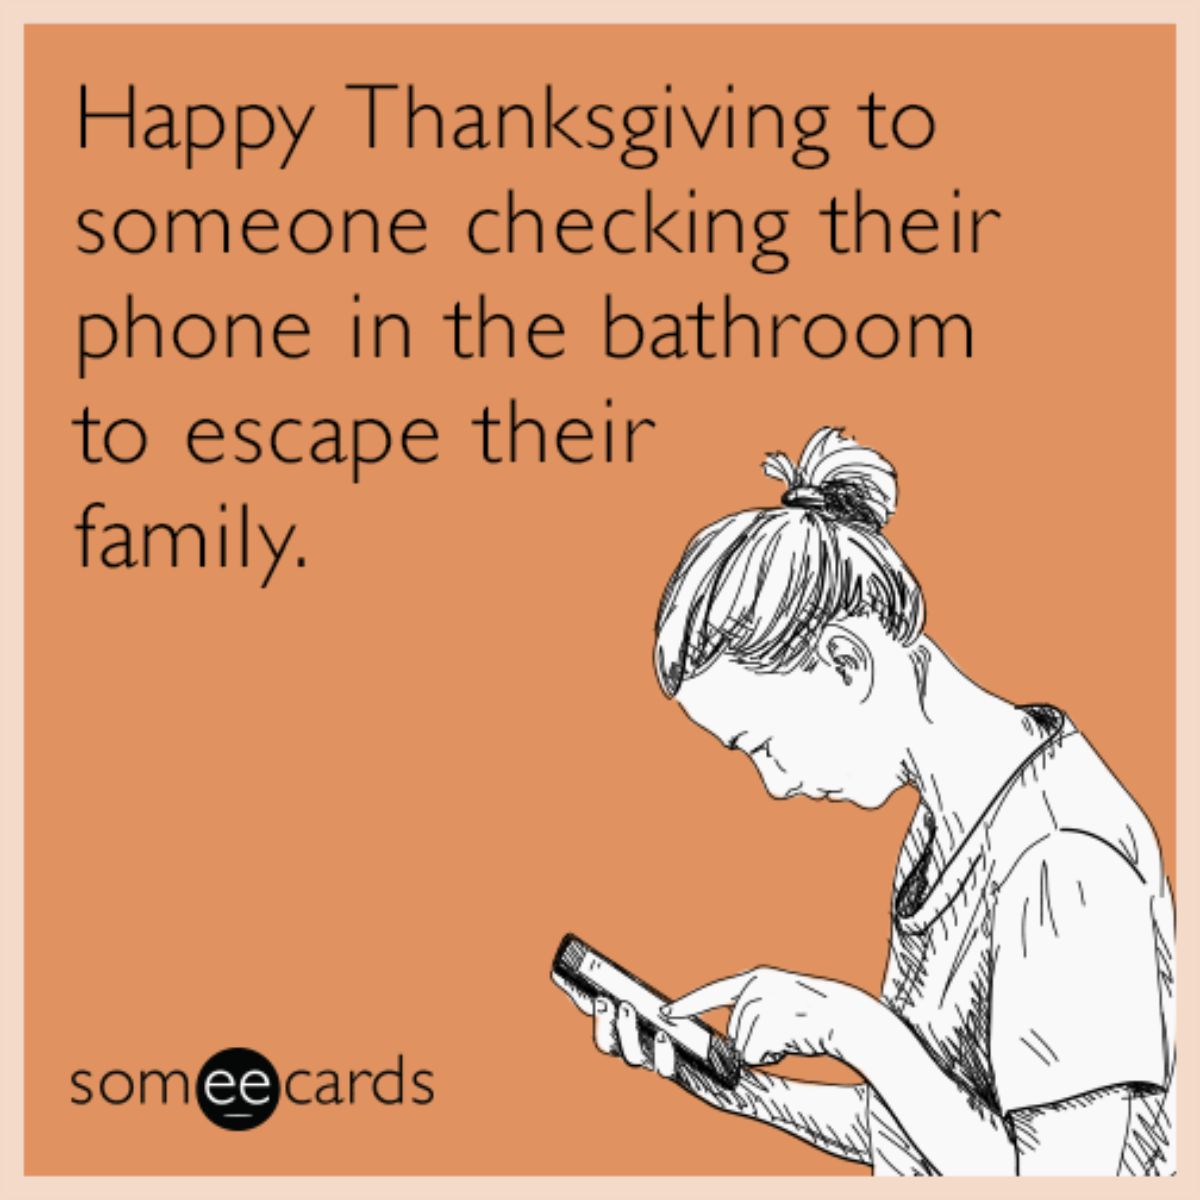 funny thanksgiving memes - Happy Thanksgiving to someone checking their phone in the bathroom. to escape their family. somee cards